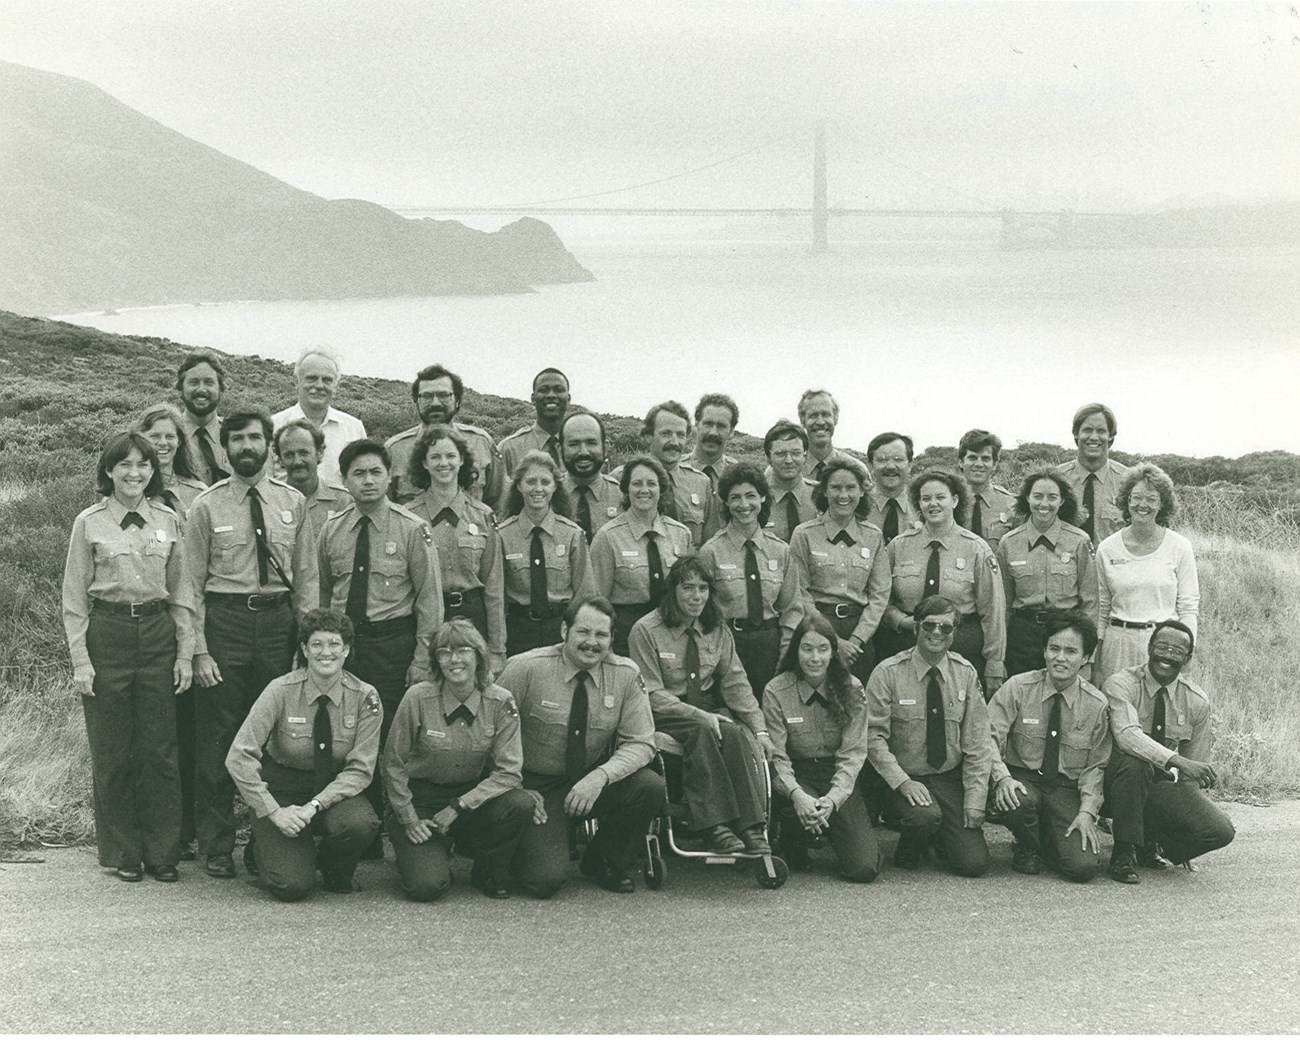 Group of Park Service employees in uniform pose in four rows  for a group photo with the Golden Gate Bridge in the distance.